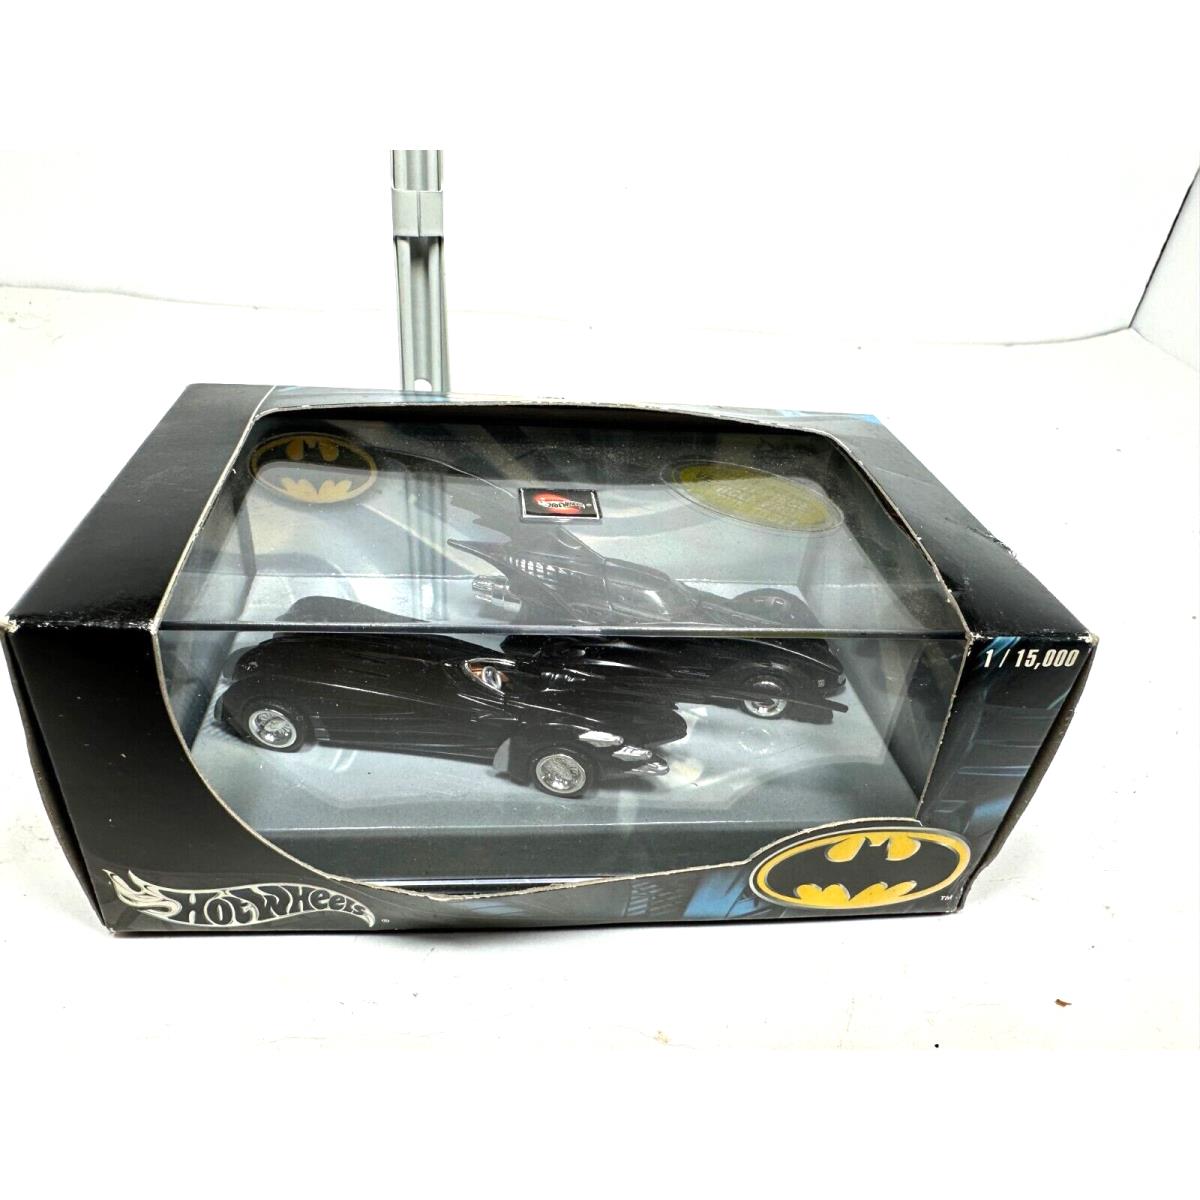 Hot Wheels 2004 Batmobile Limited Edition 2 Pack Batman Forever Limited Edition